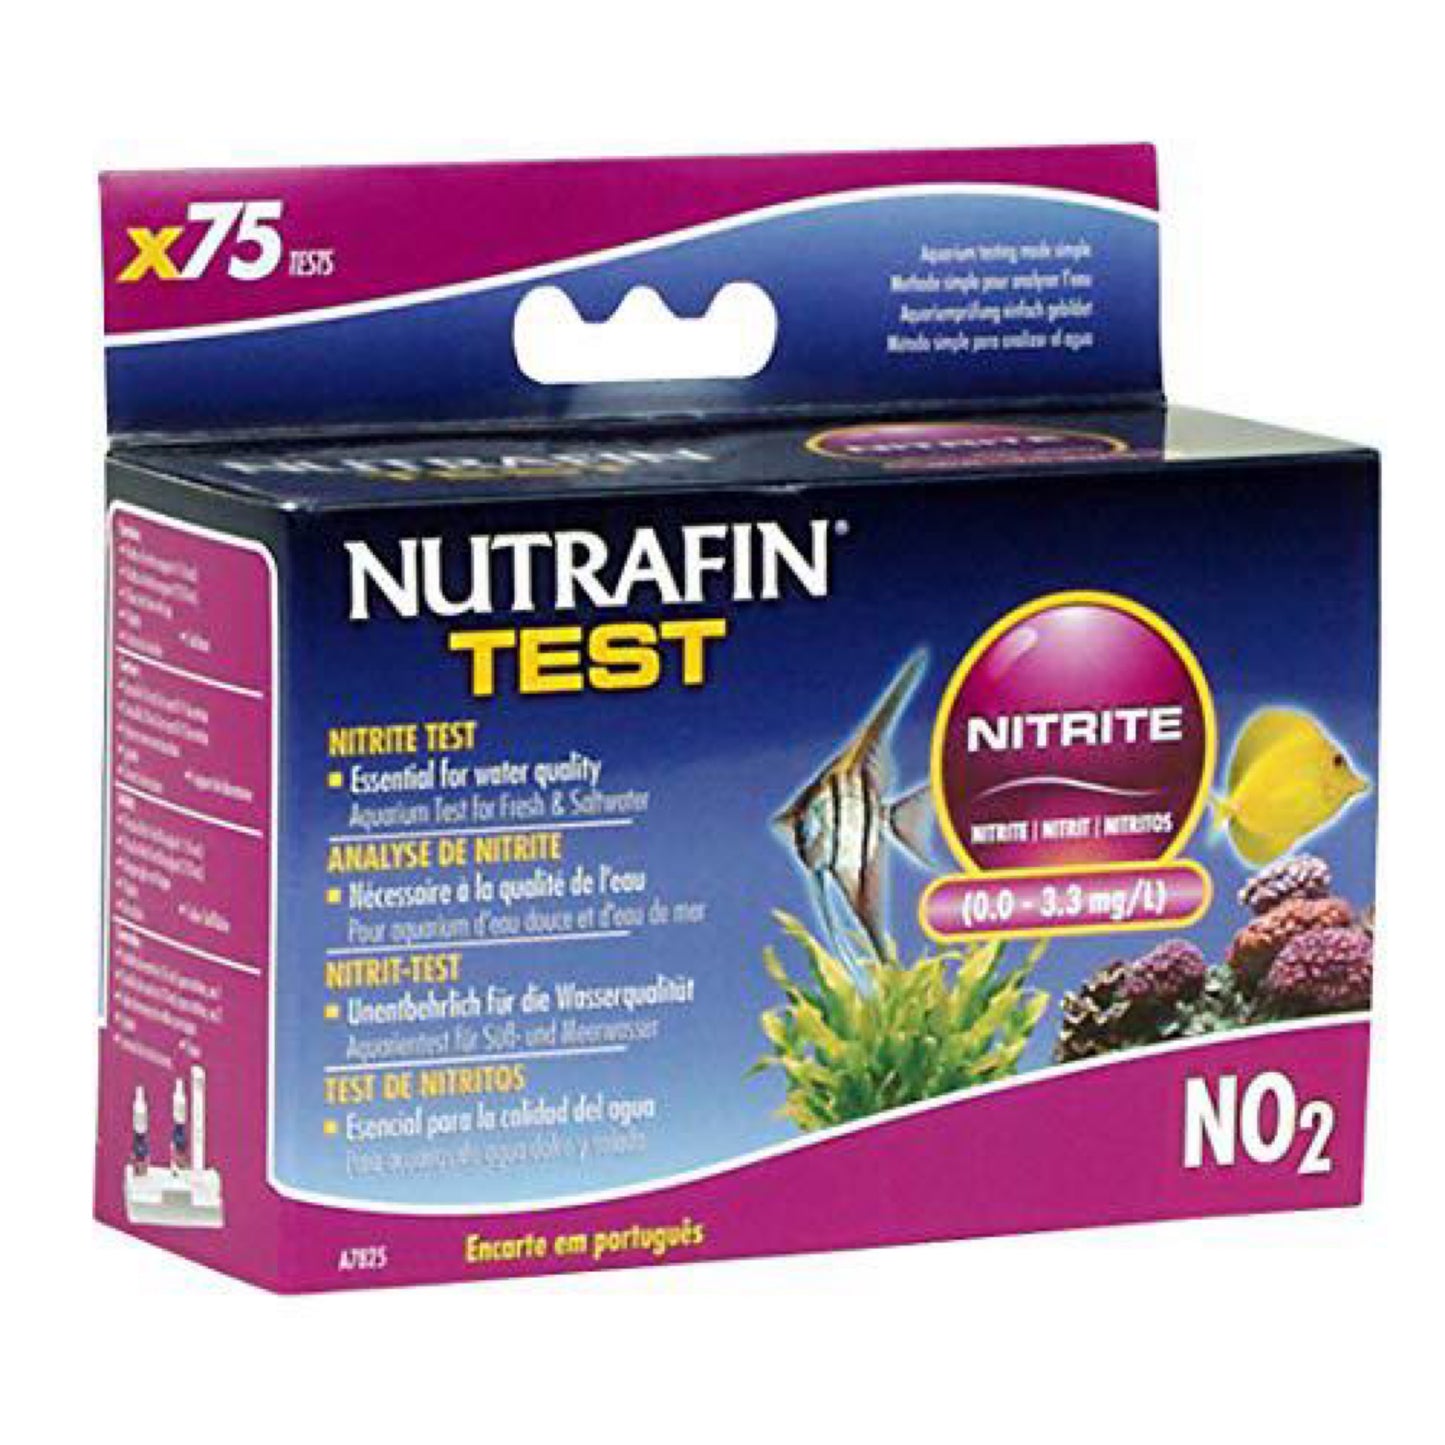 Nutrafin Nitrite 0.0 to 3.3 mg/L for Fresh and Saltwater